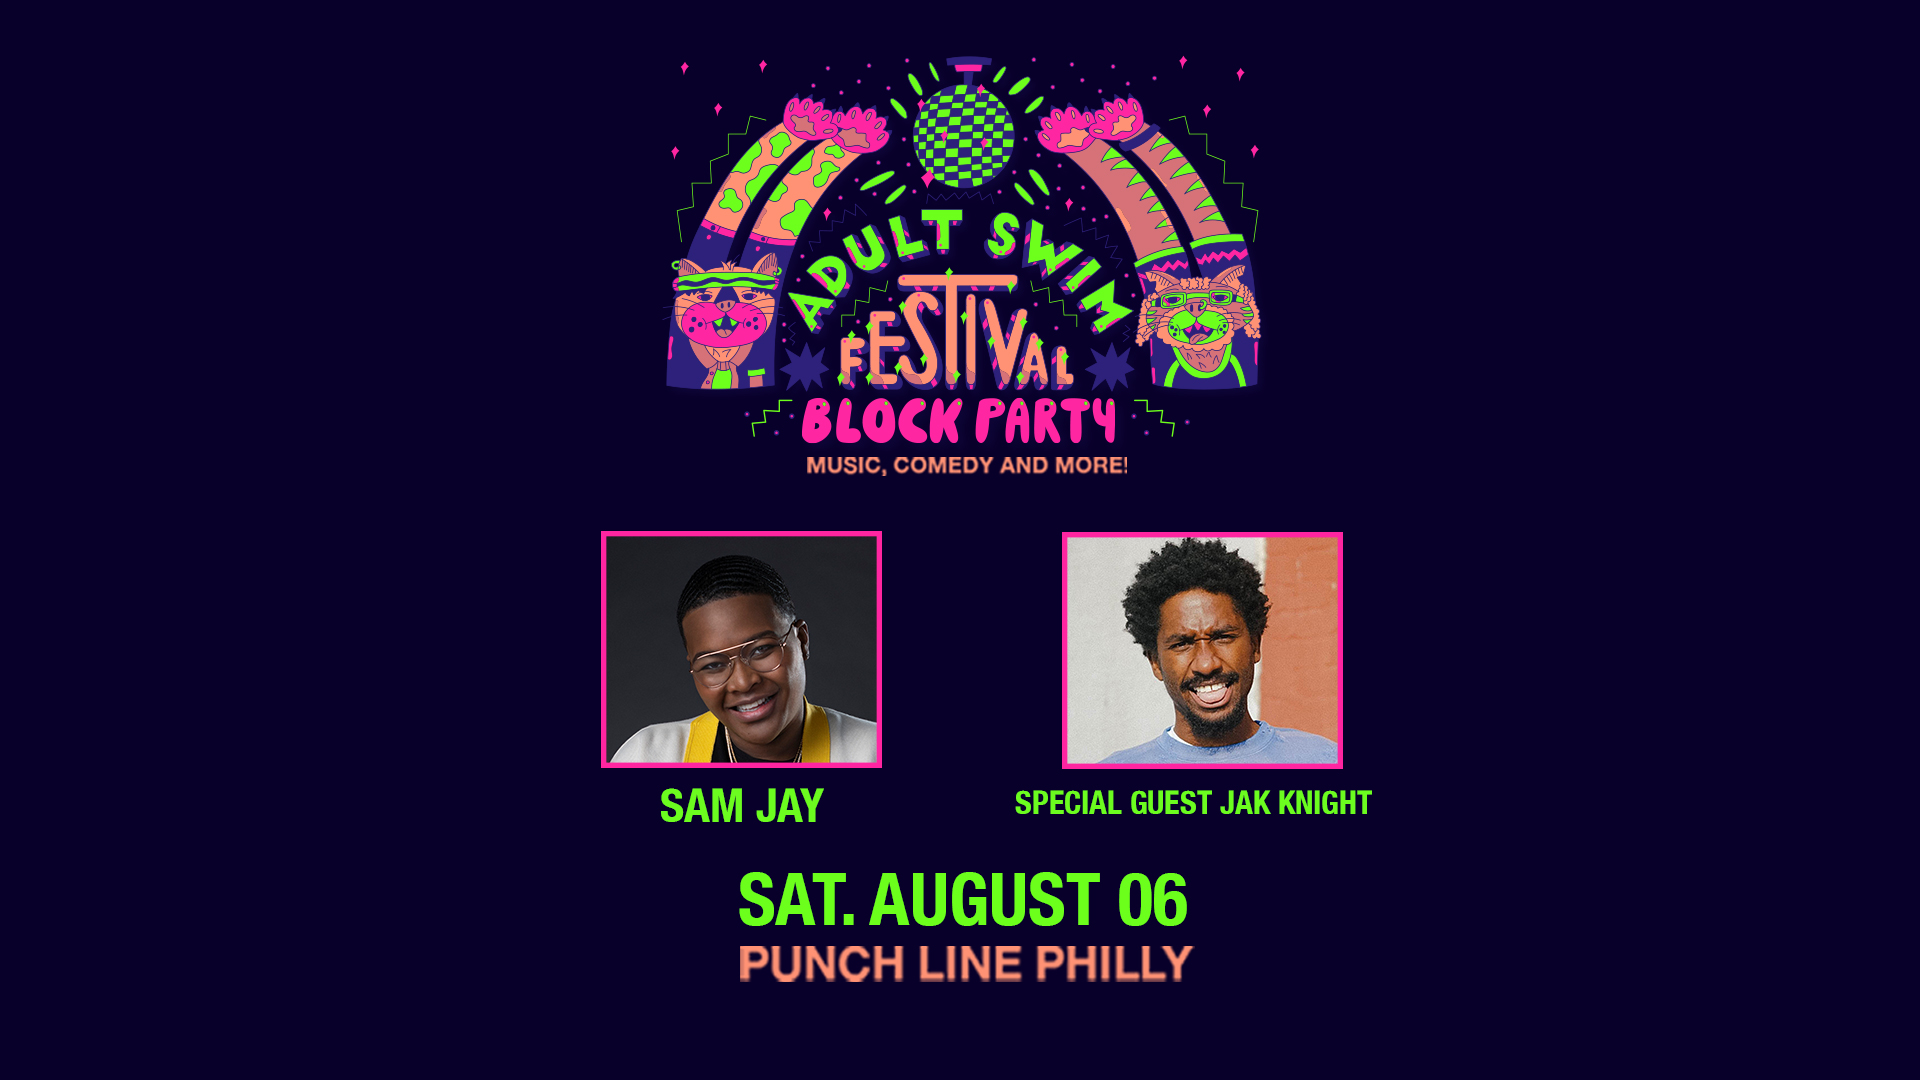 Sam Jay with special guest Jak Knight -Adult Swim Festival Block Party